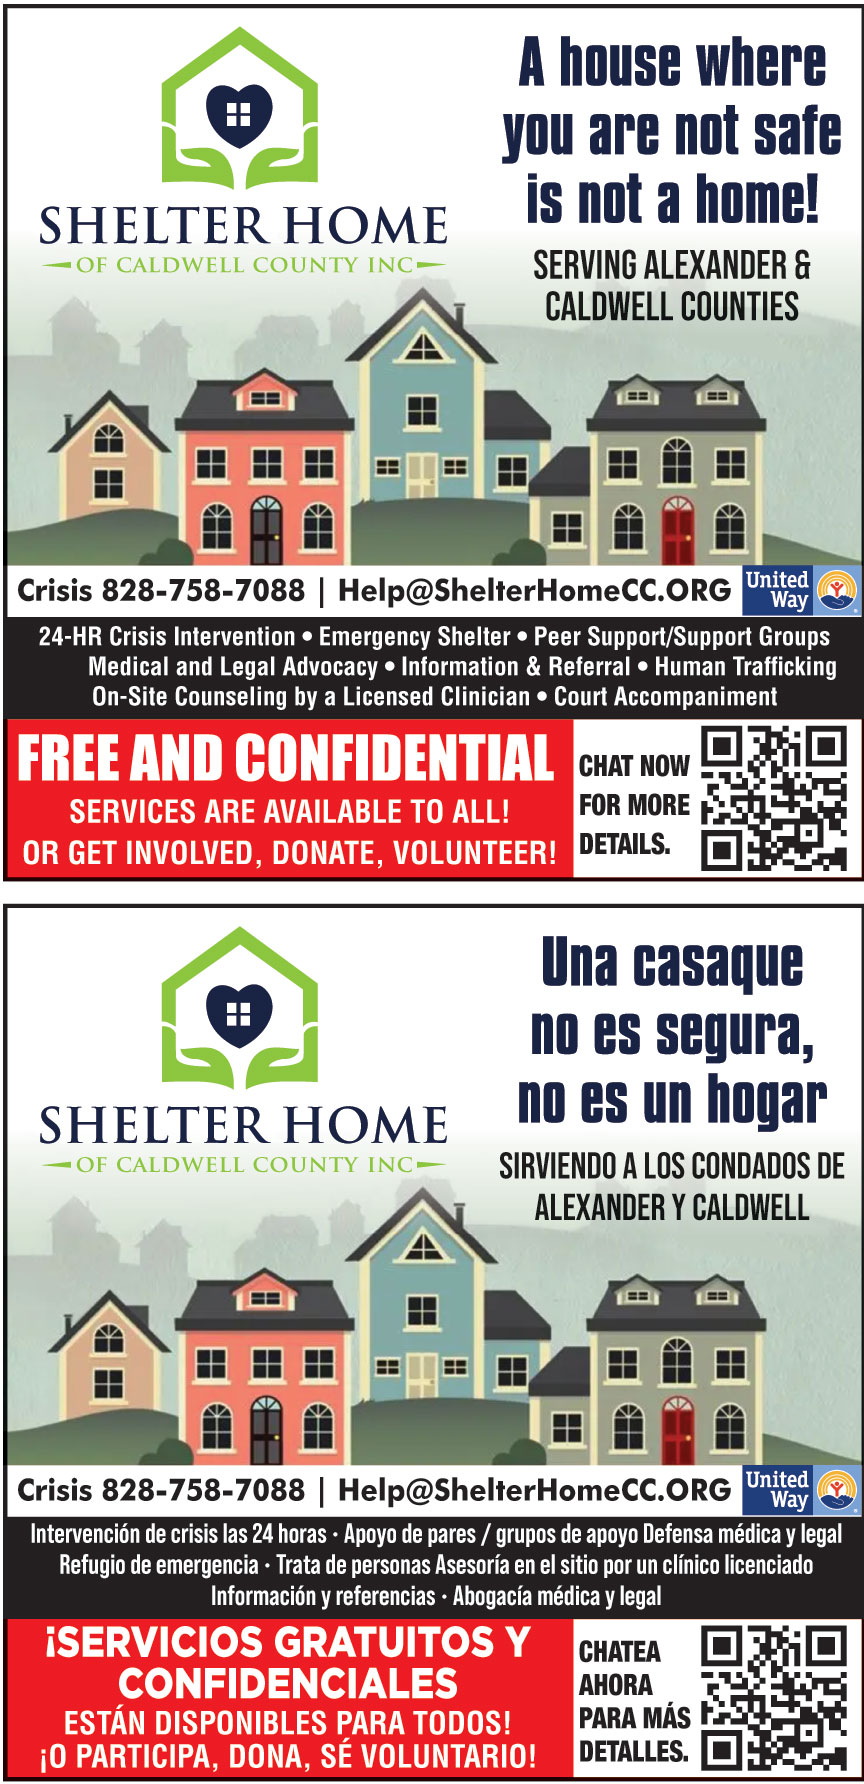 SHELTER HOME OF CALDWELL